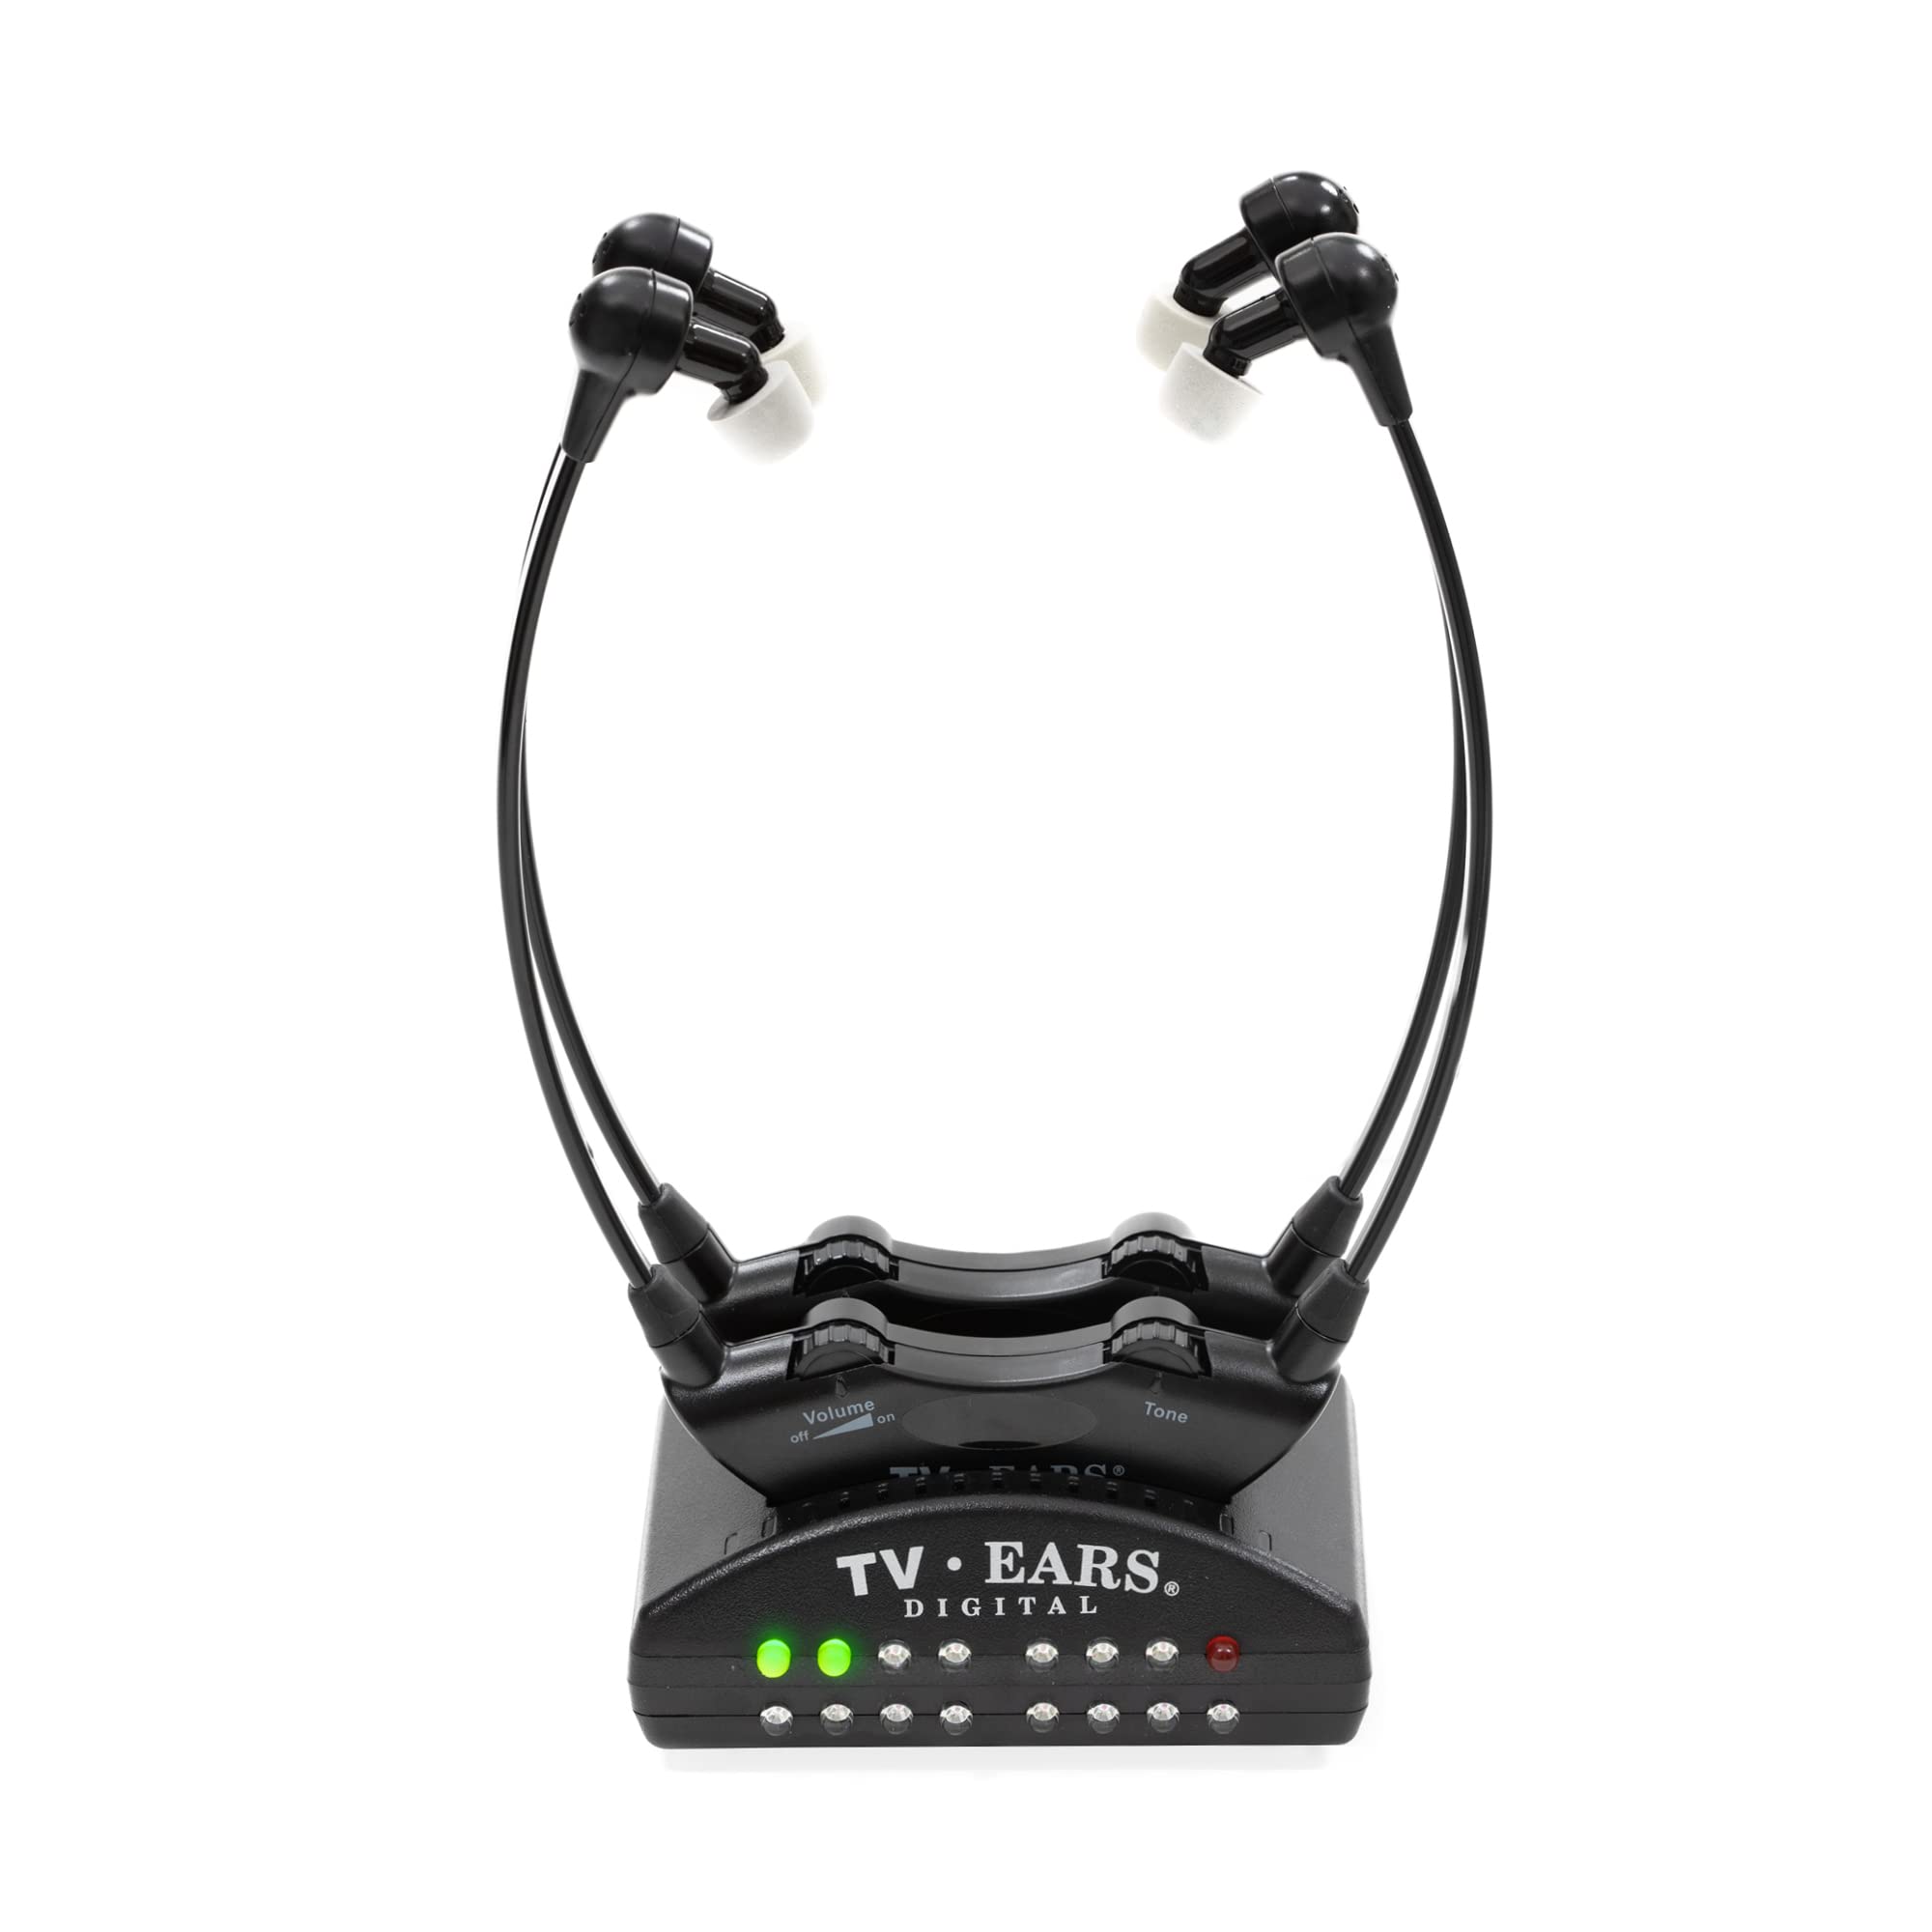  TV Ears Inc TV Ears Dual Digital Wireless Headset System - Use 2 Headsets at same time w/ Different Volume, Supports All TVs, Ideal for Seniors & Hearing Impaired, Infrared, Plug N' Play - Dr Recommended...